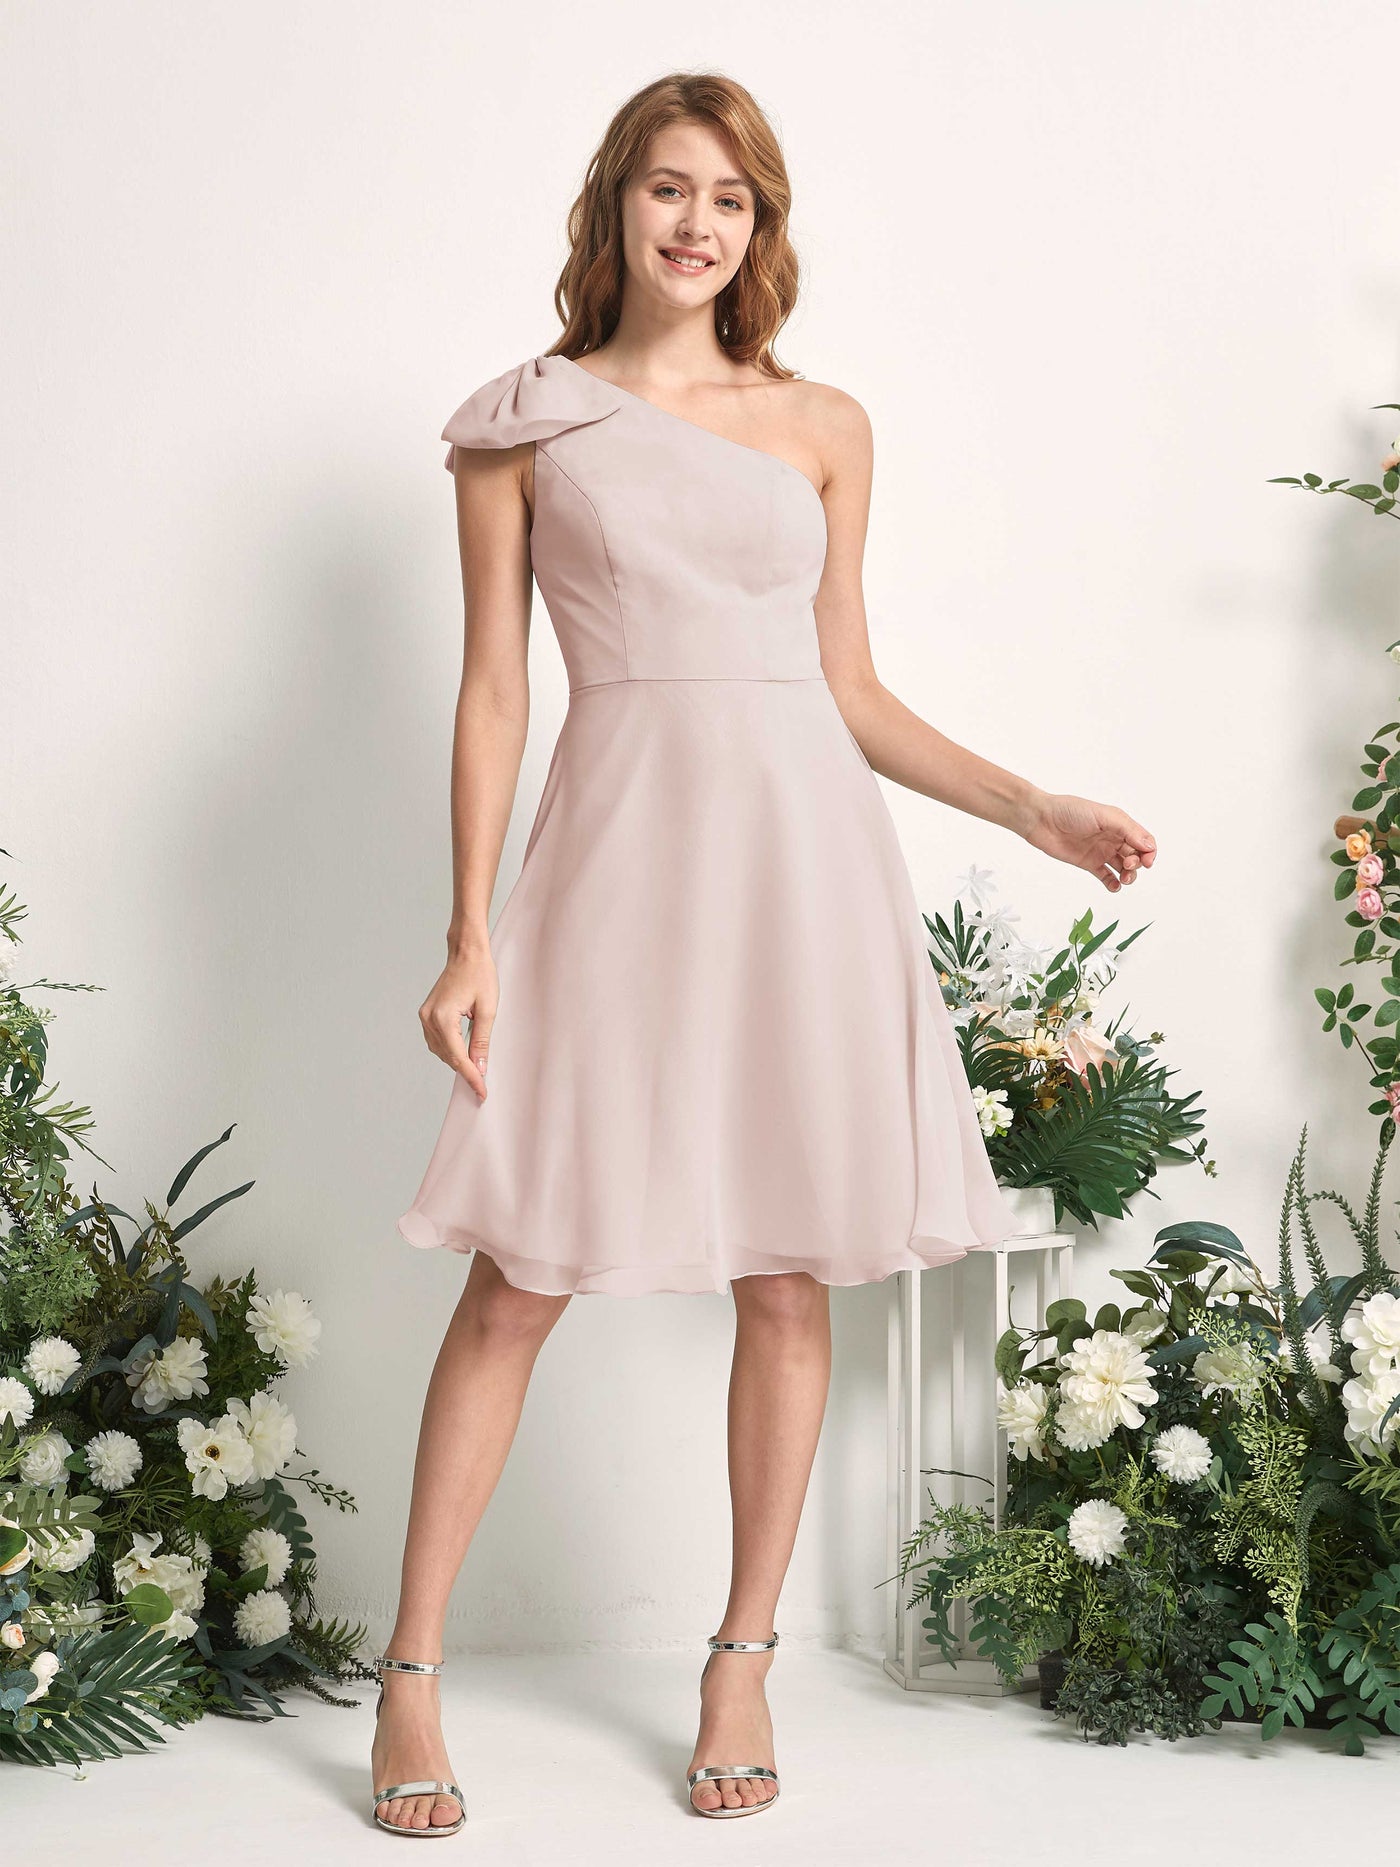 Bridesmaid Dress A-line Chiffon One Shoulder Knee Length Sleeveless Wedding Party Dress - Biscotti (81227035)#color_biscotti